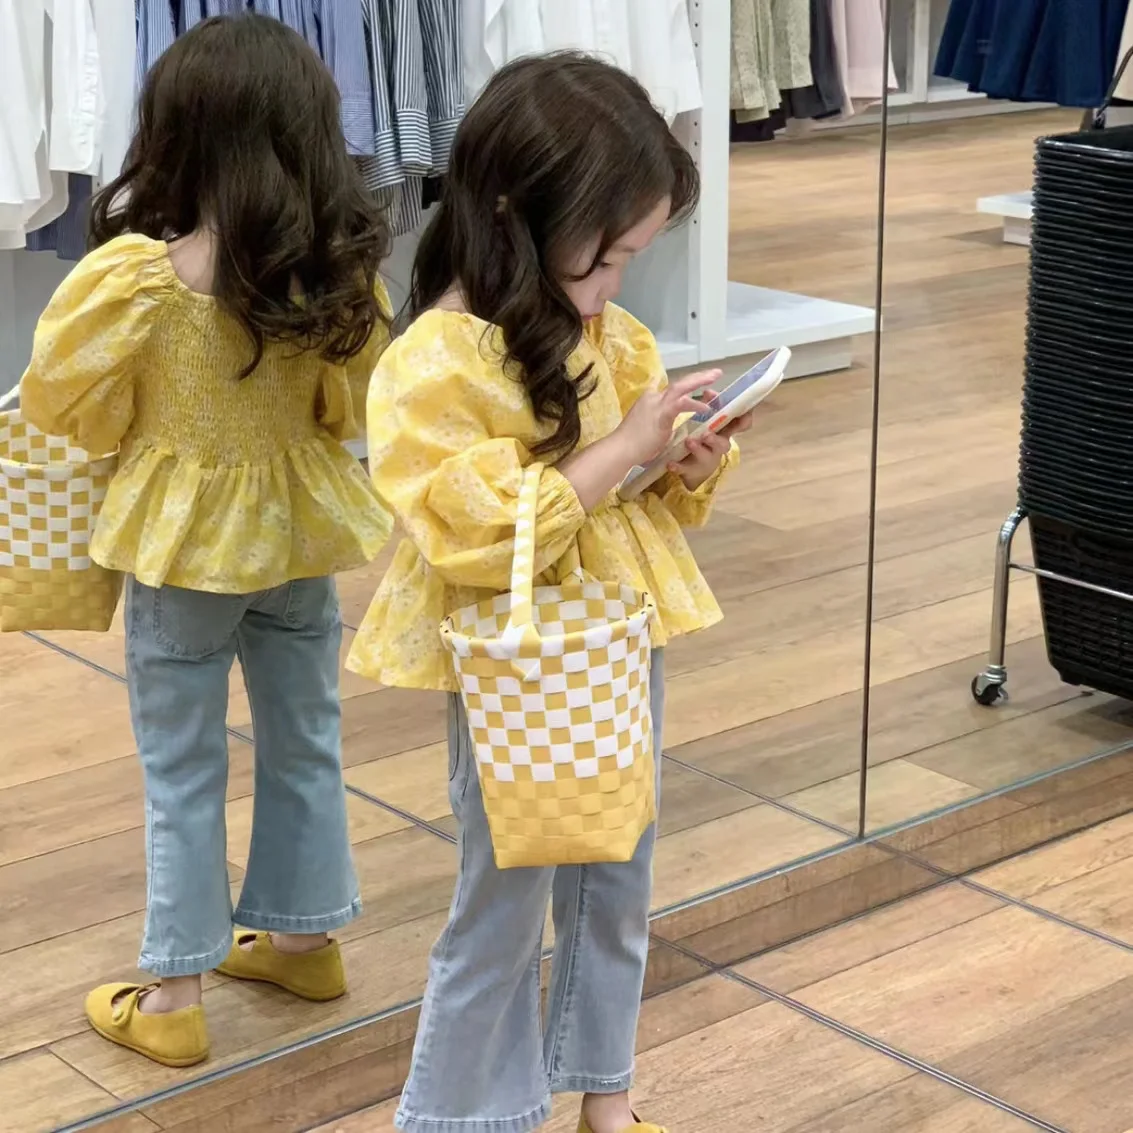 Girls Long Sleeved Shirt Fashionable Spring Clothing Childrens Princess Style Doll Shirt Top Denim Bell Bottoms Outerwear Pants